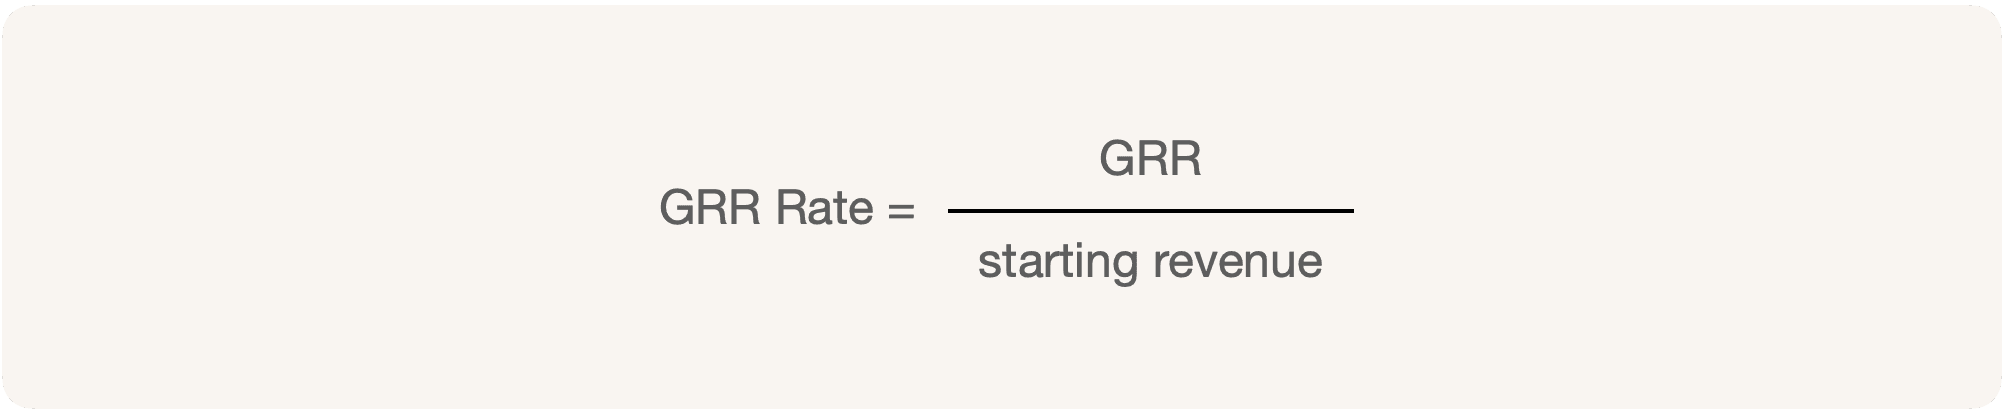 GRR Rate is the ratio of GRR and starting revenue